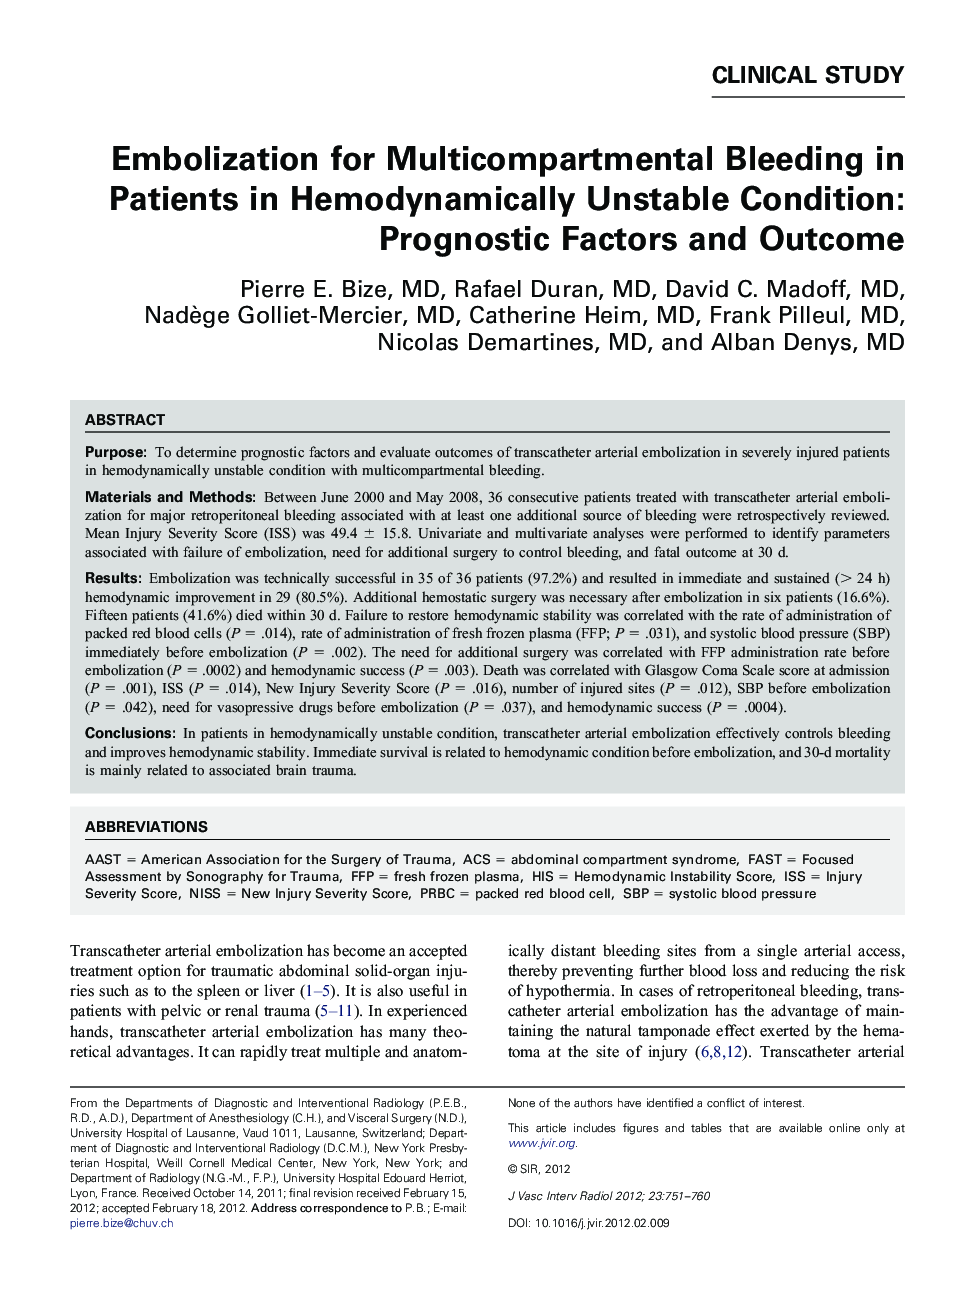 Embolization for Multicompartmental Bleeding in Patients in Hemodynamically Unstable Condition: Prognostic Factors and Outcome